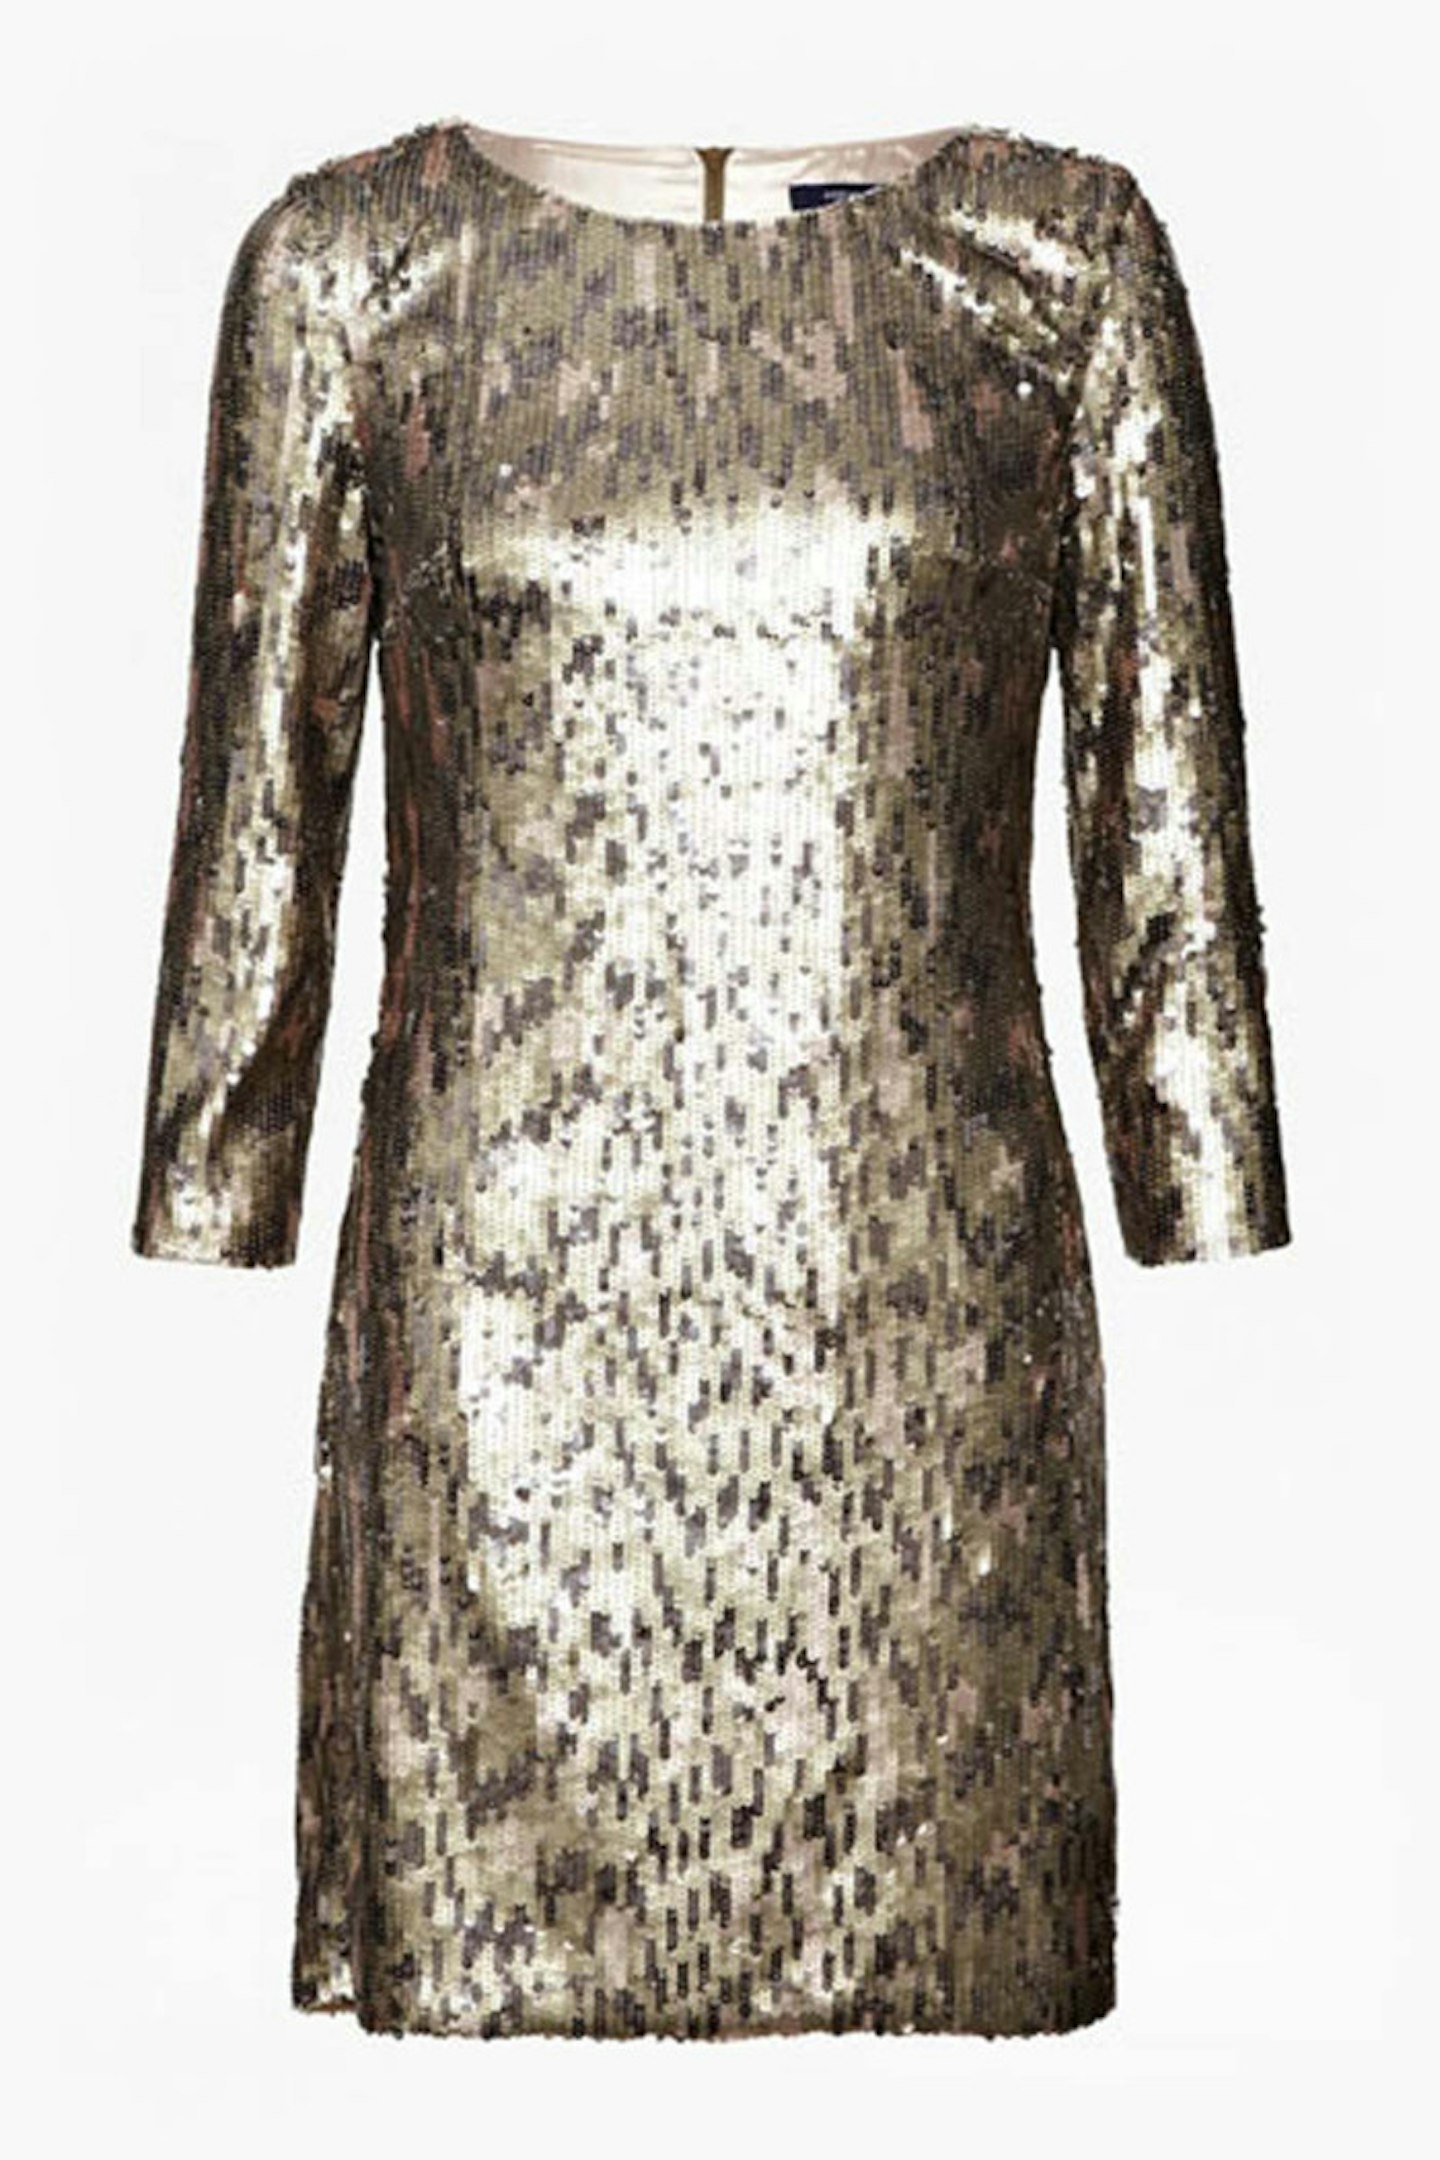 Gold waved sequin dress, £210, French Connection